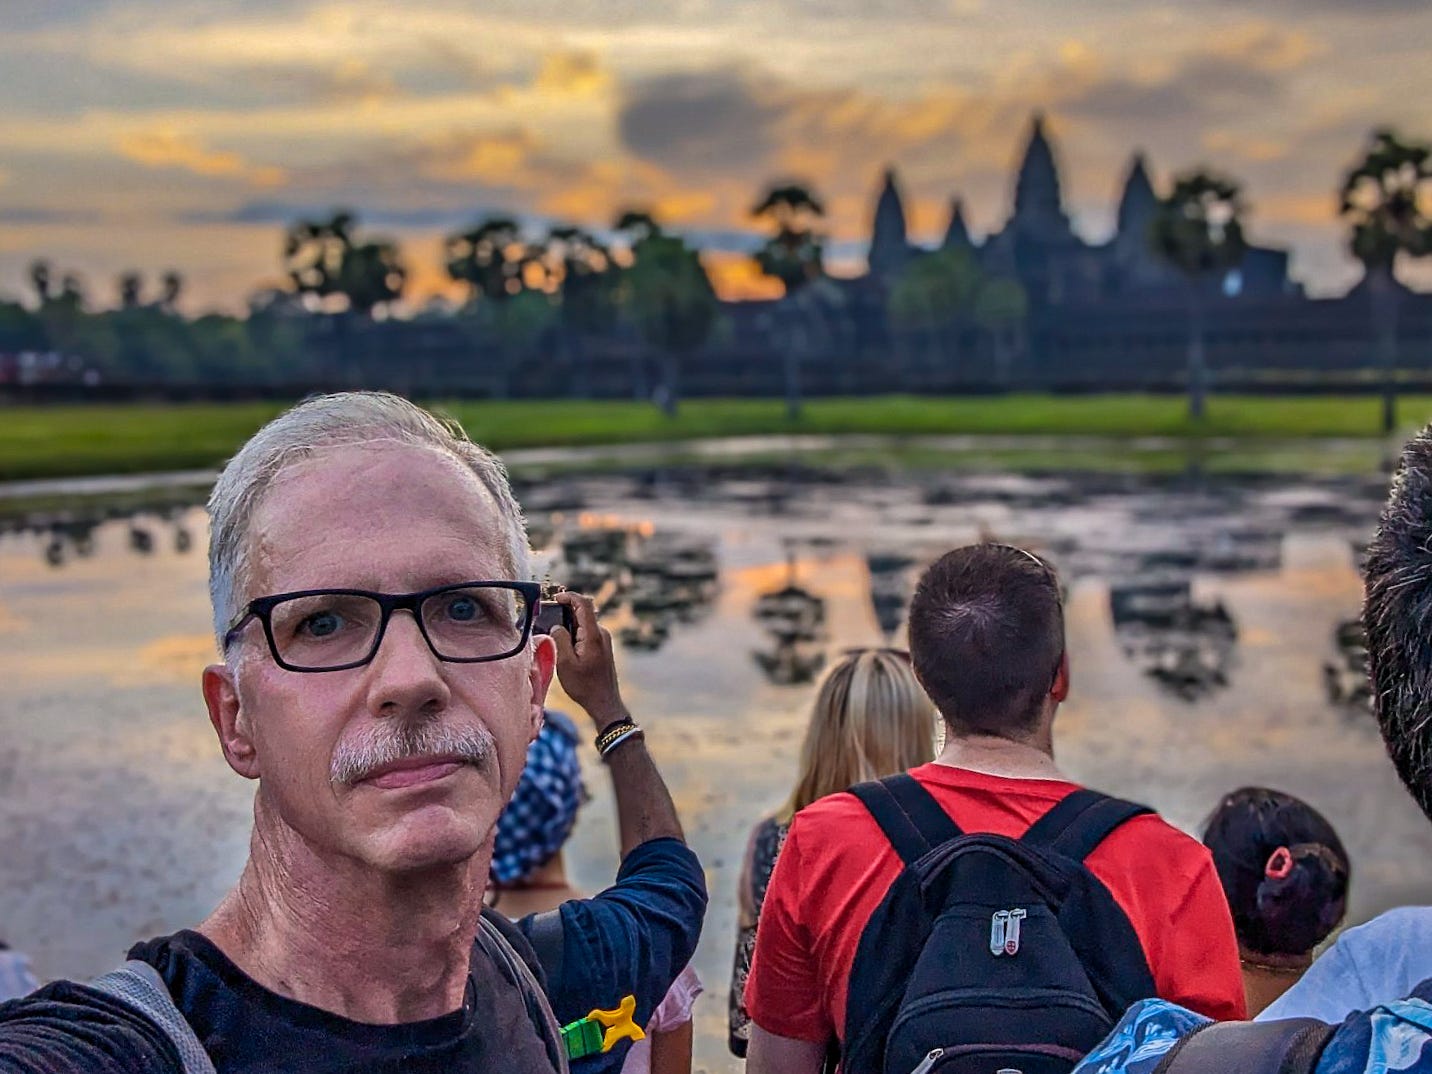 Michael standing in front of Angkor Wat, which is reflected in the water as the sun rises. 